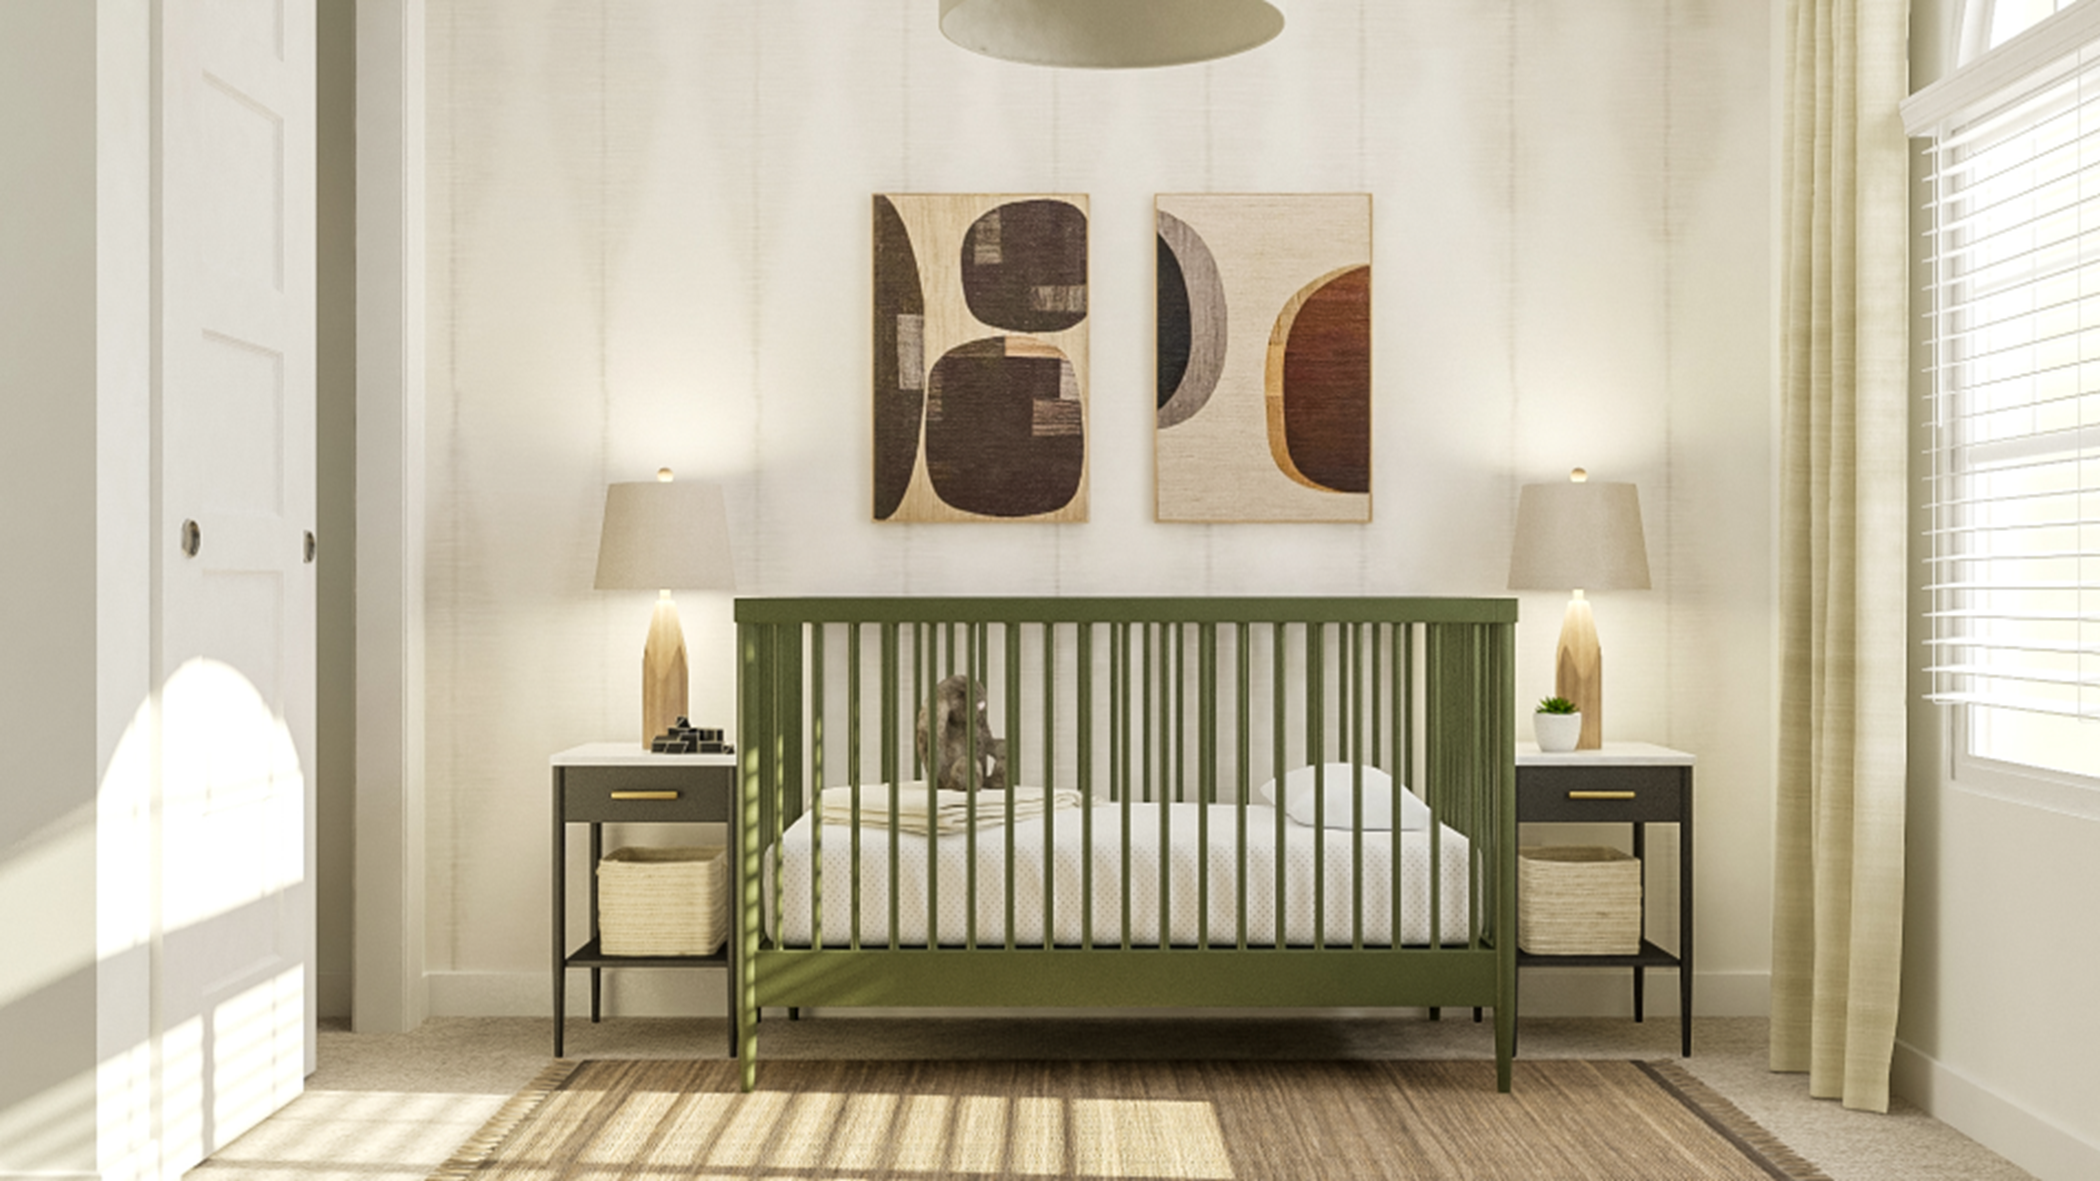 Bedroom with crib